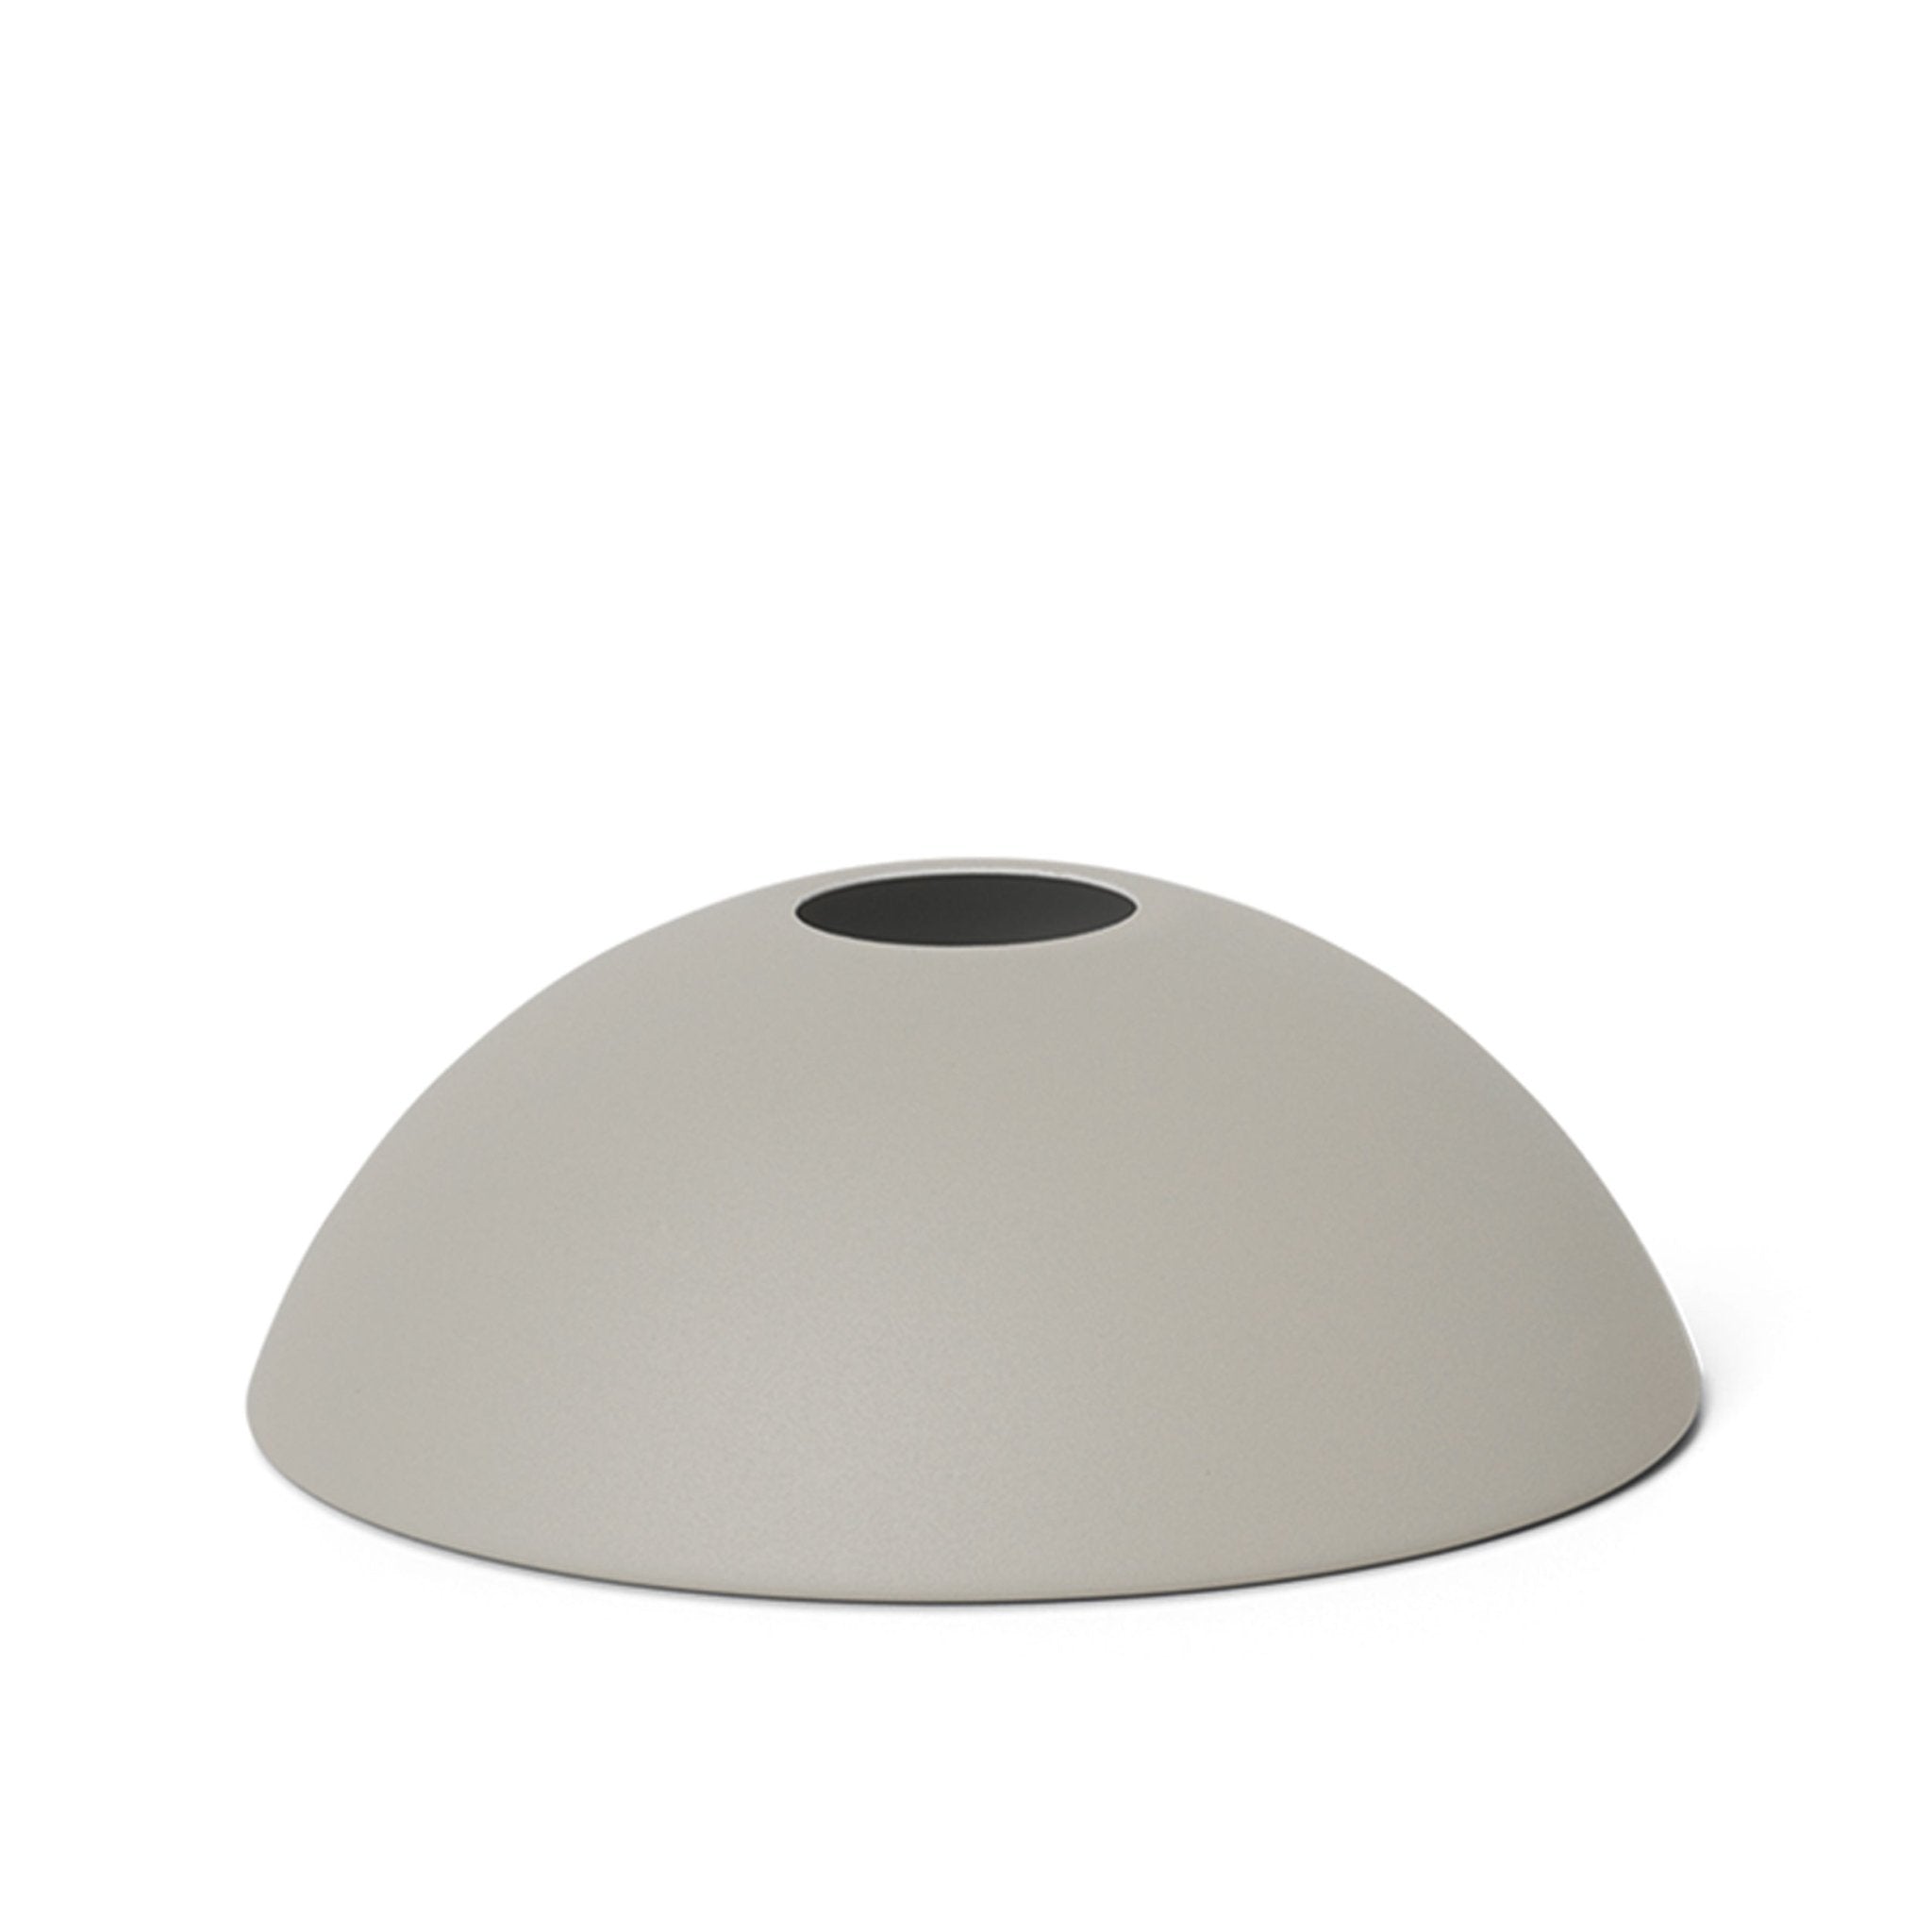 Collect Lighting - Hoop Shade Only - Light Grey